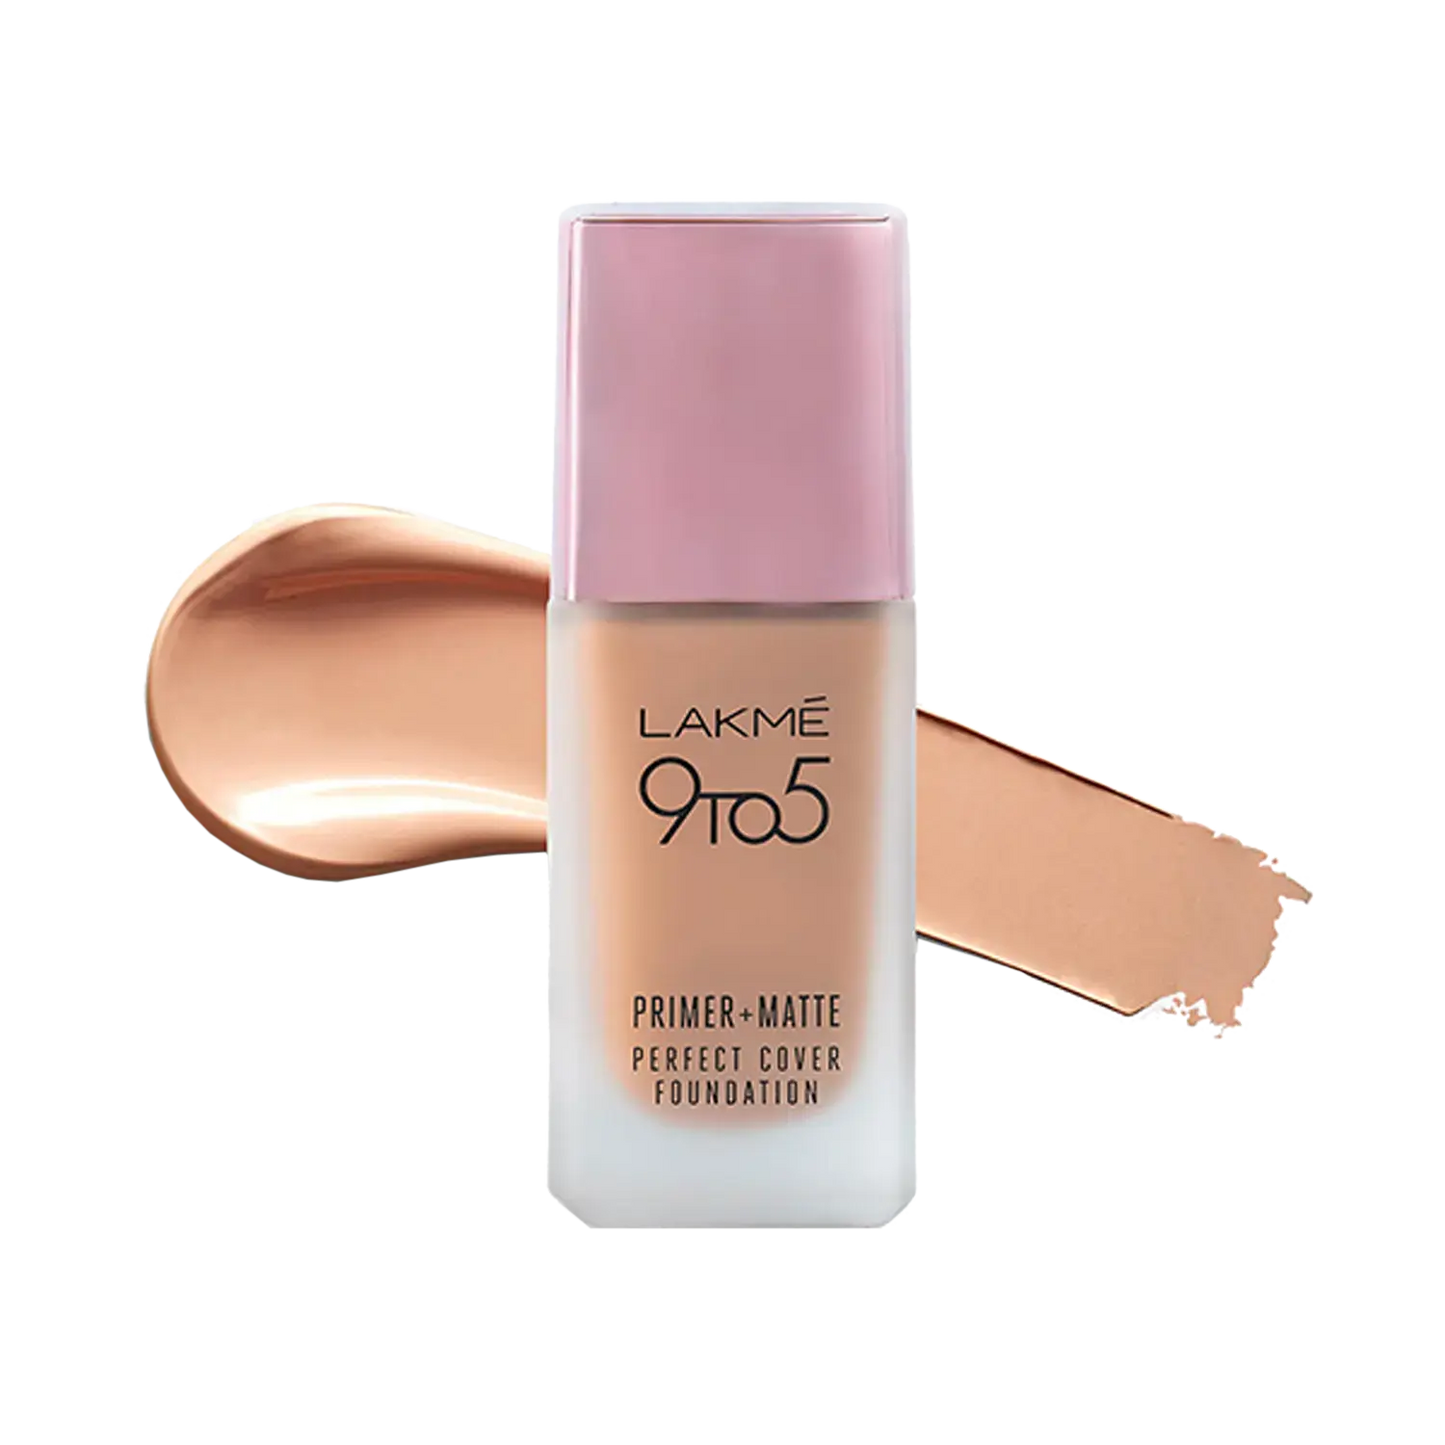 Lakme 9 To 5 Primer + Matte Perfect Cover Foundation - C140 Cool Rose (25ml)